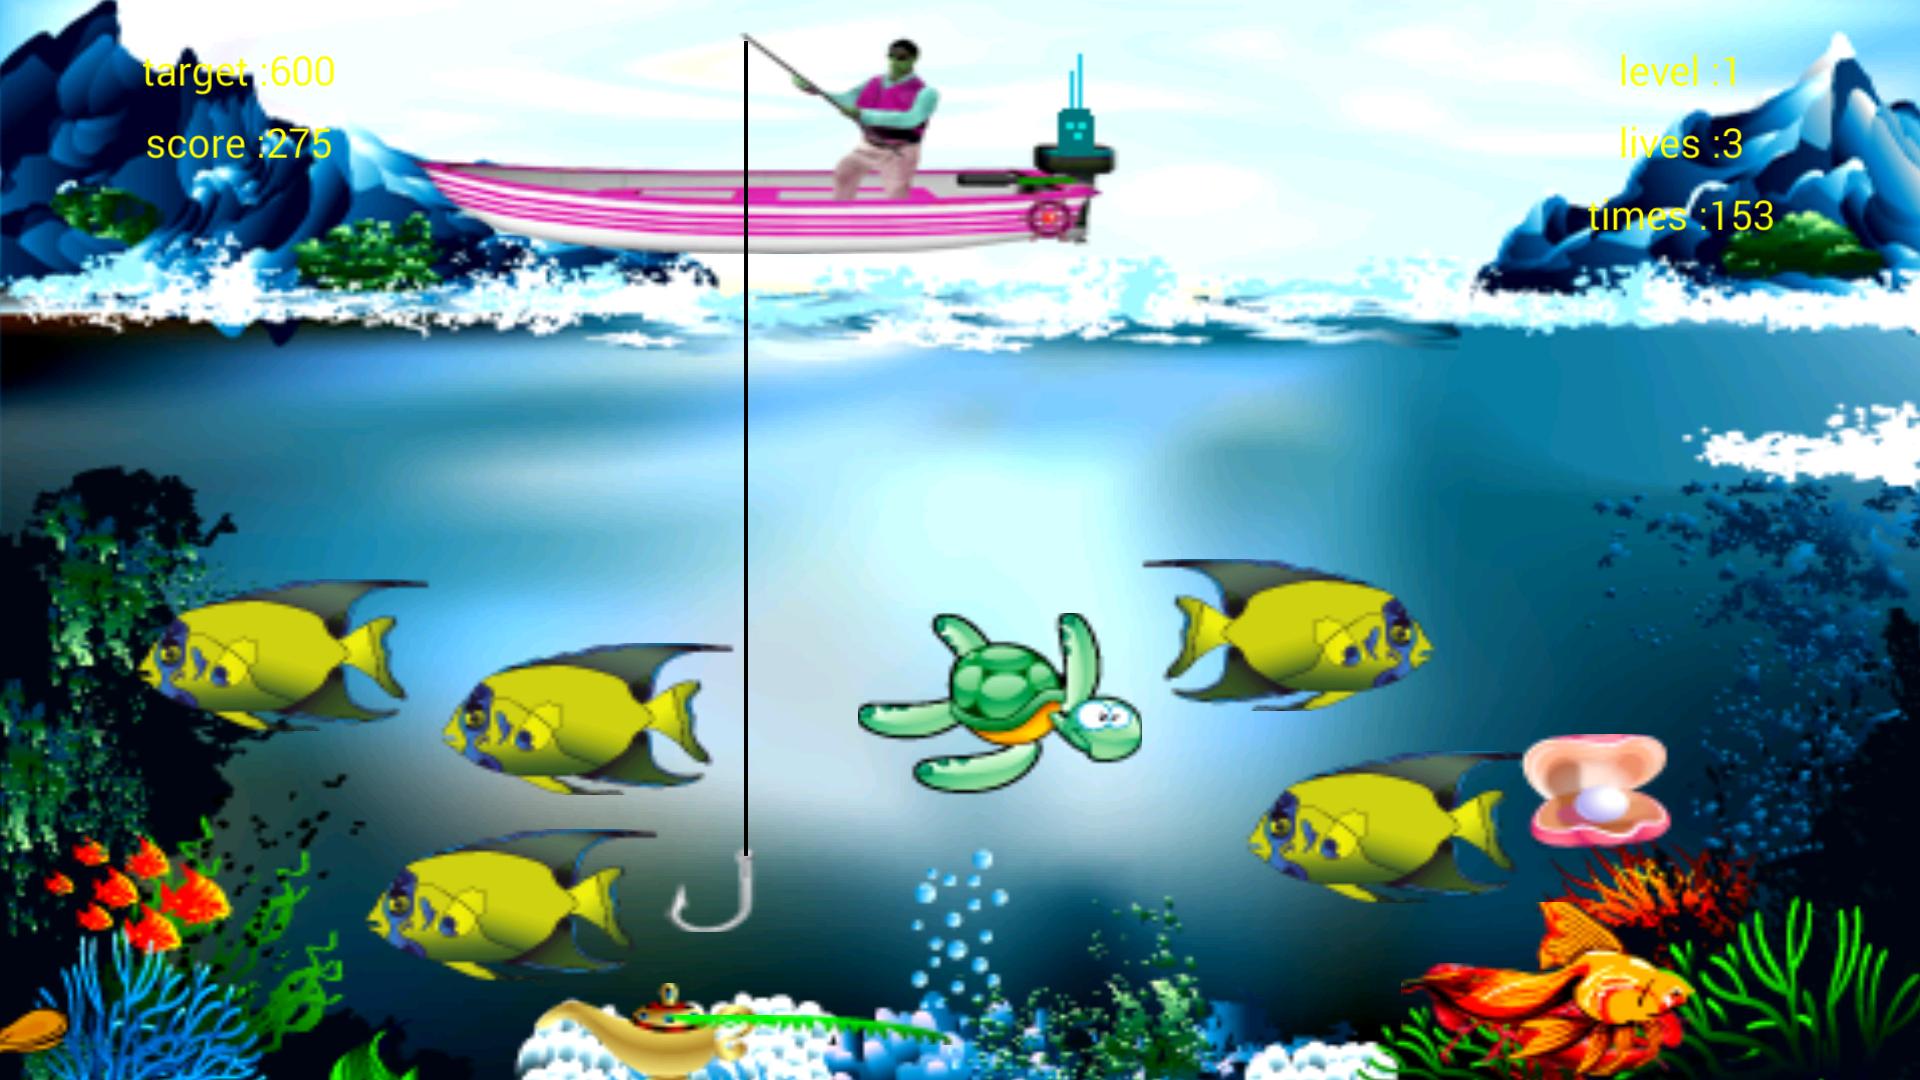  Fishing Game for Android - APK Download